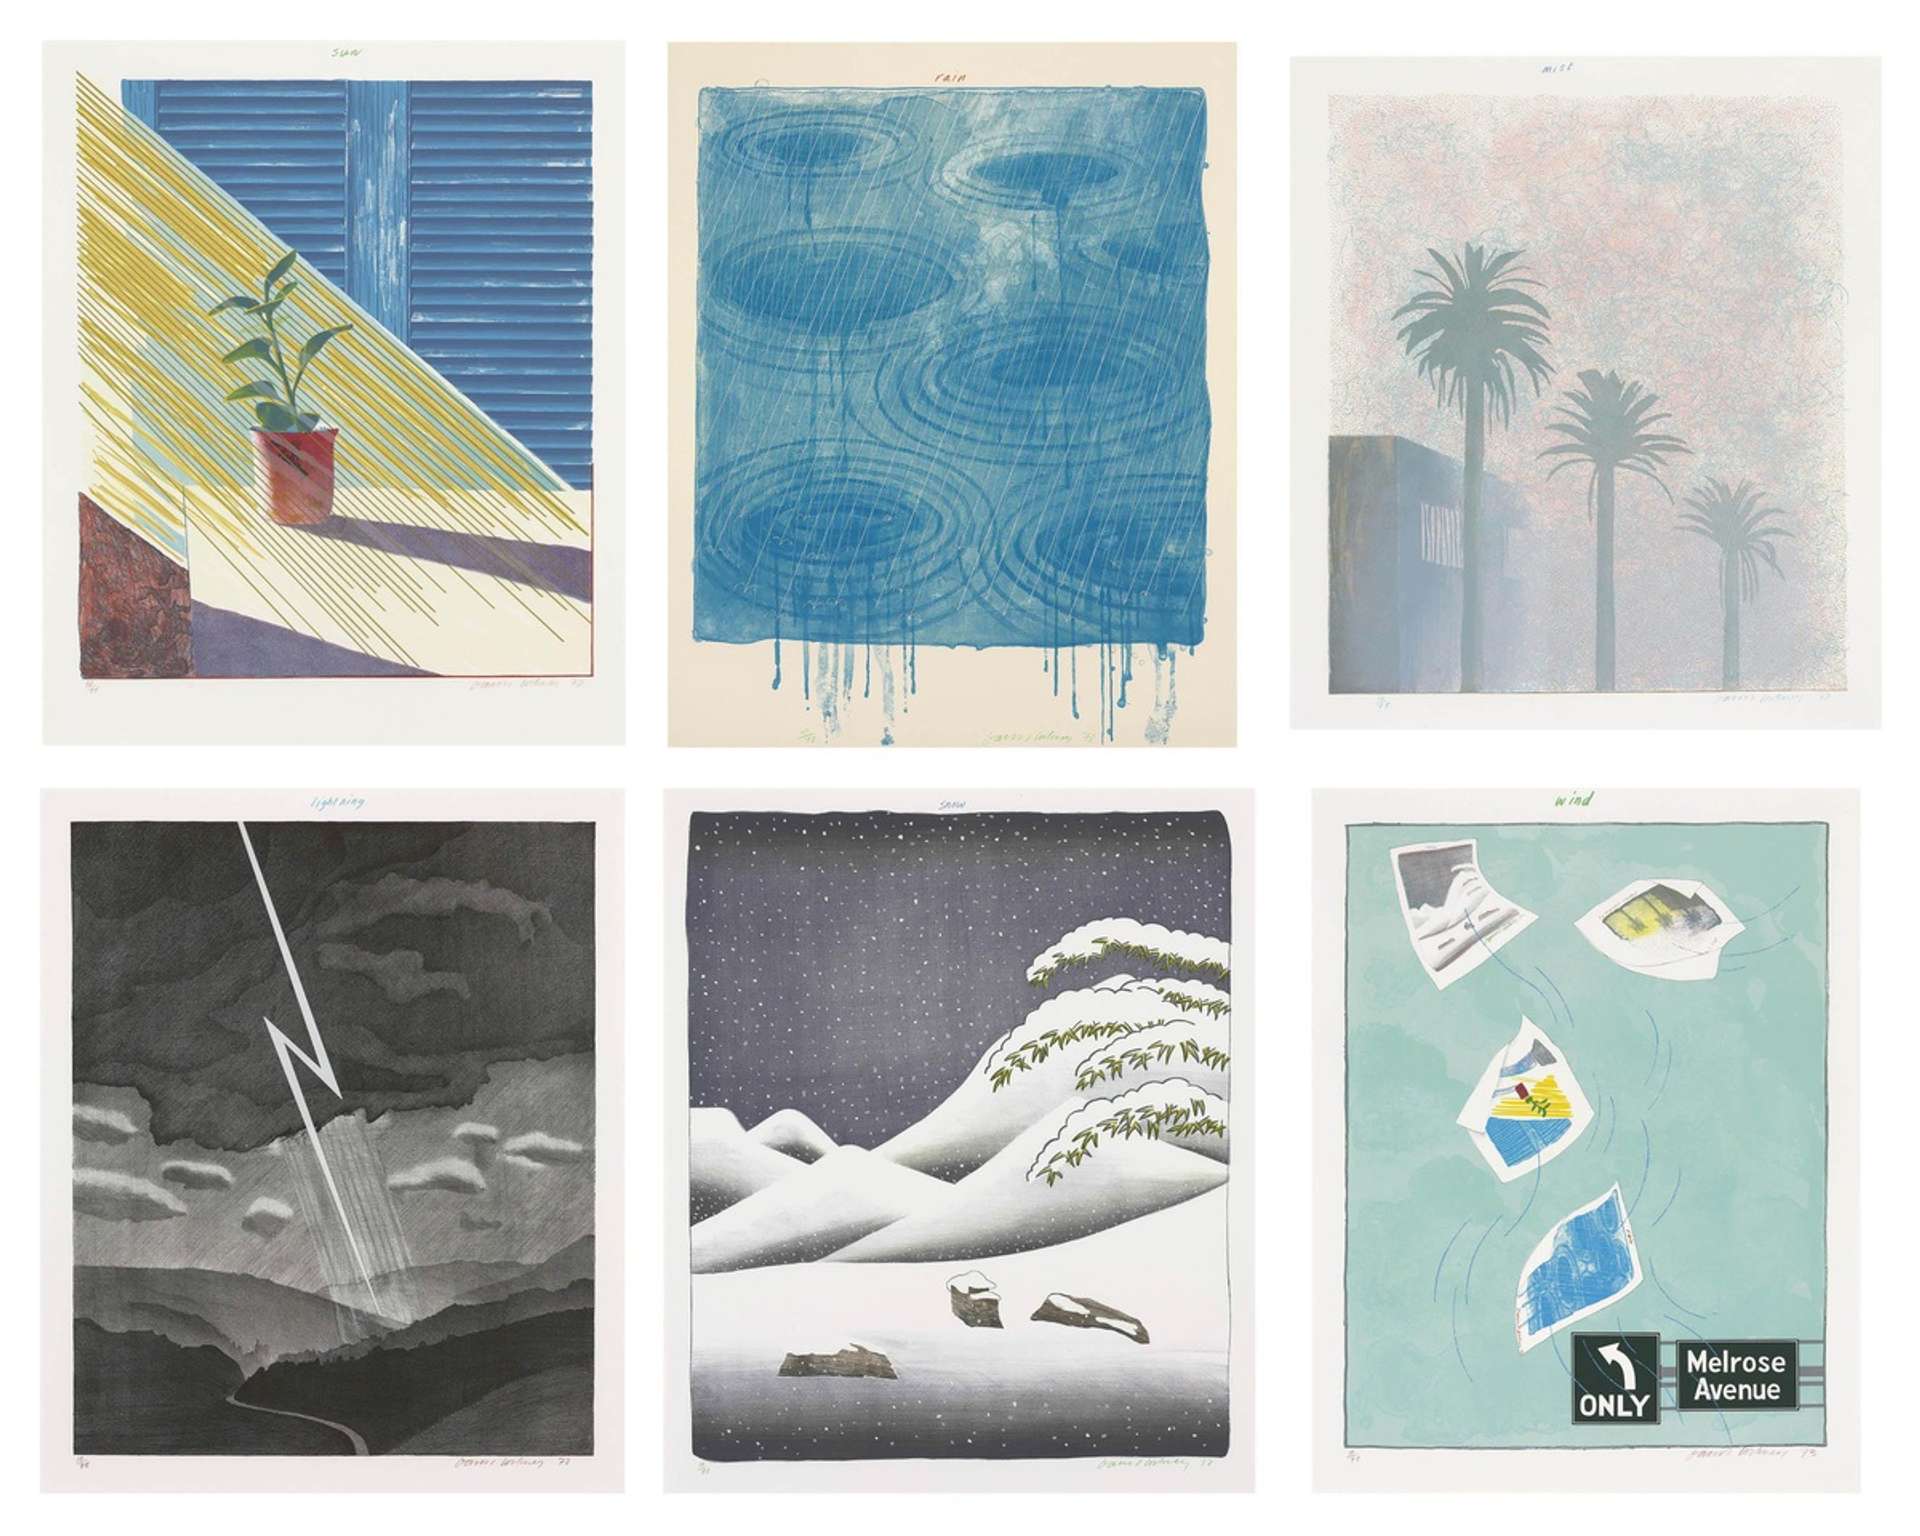 David Hockney's The Weather Series (complete set). A combination of lithographic prints from the series. 